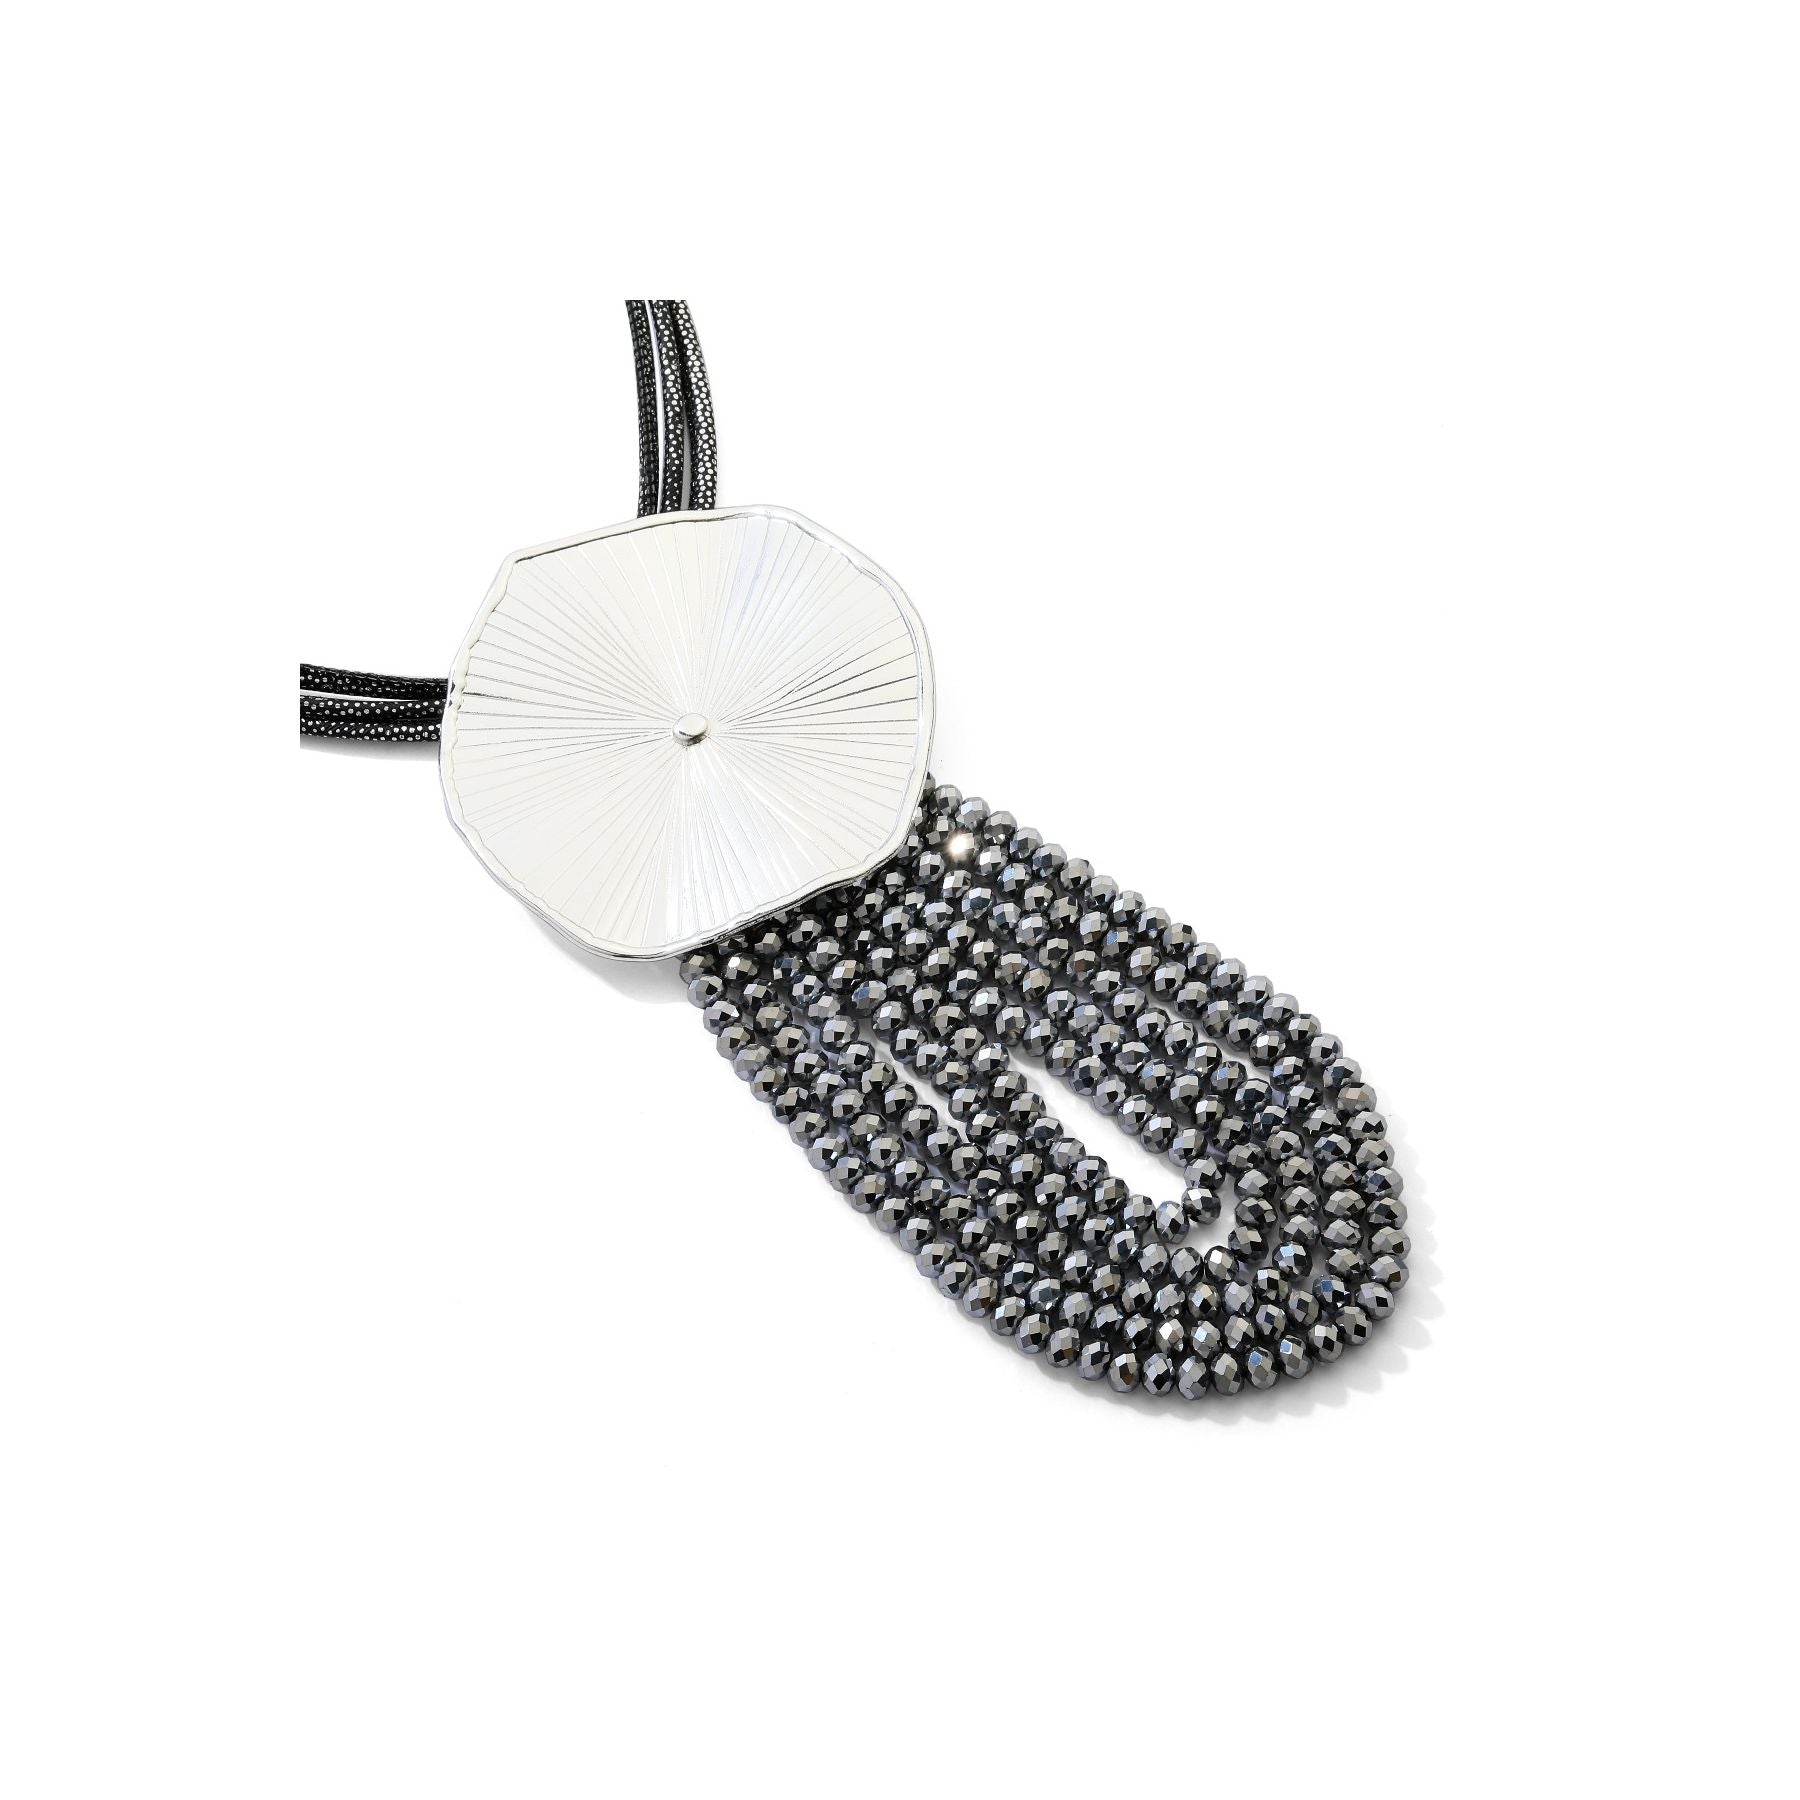 Silver Lilypad on Black Cord with Sparkly Bead Tassle Adjustable Length Necklace from Frinkle